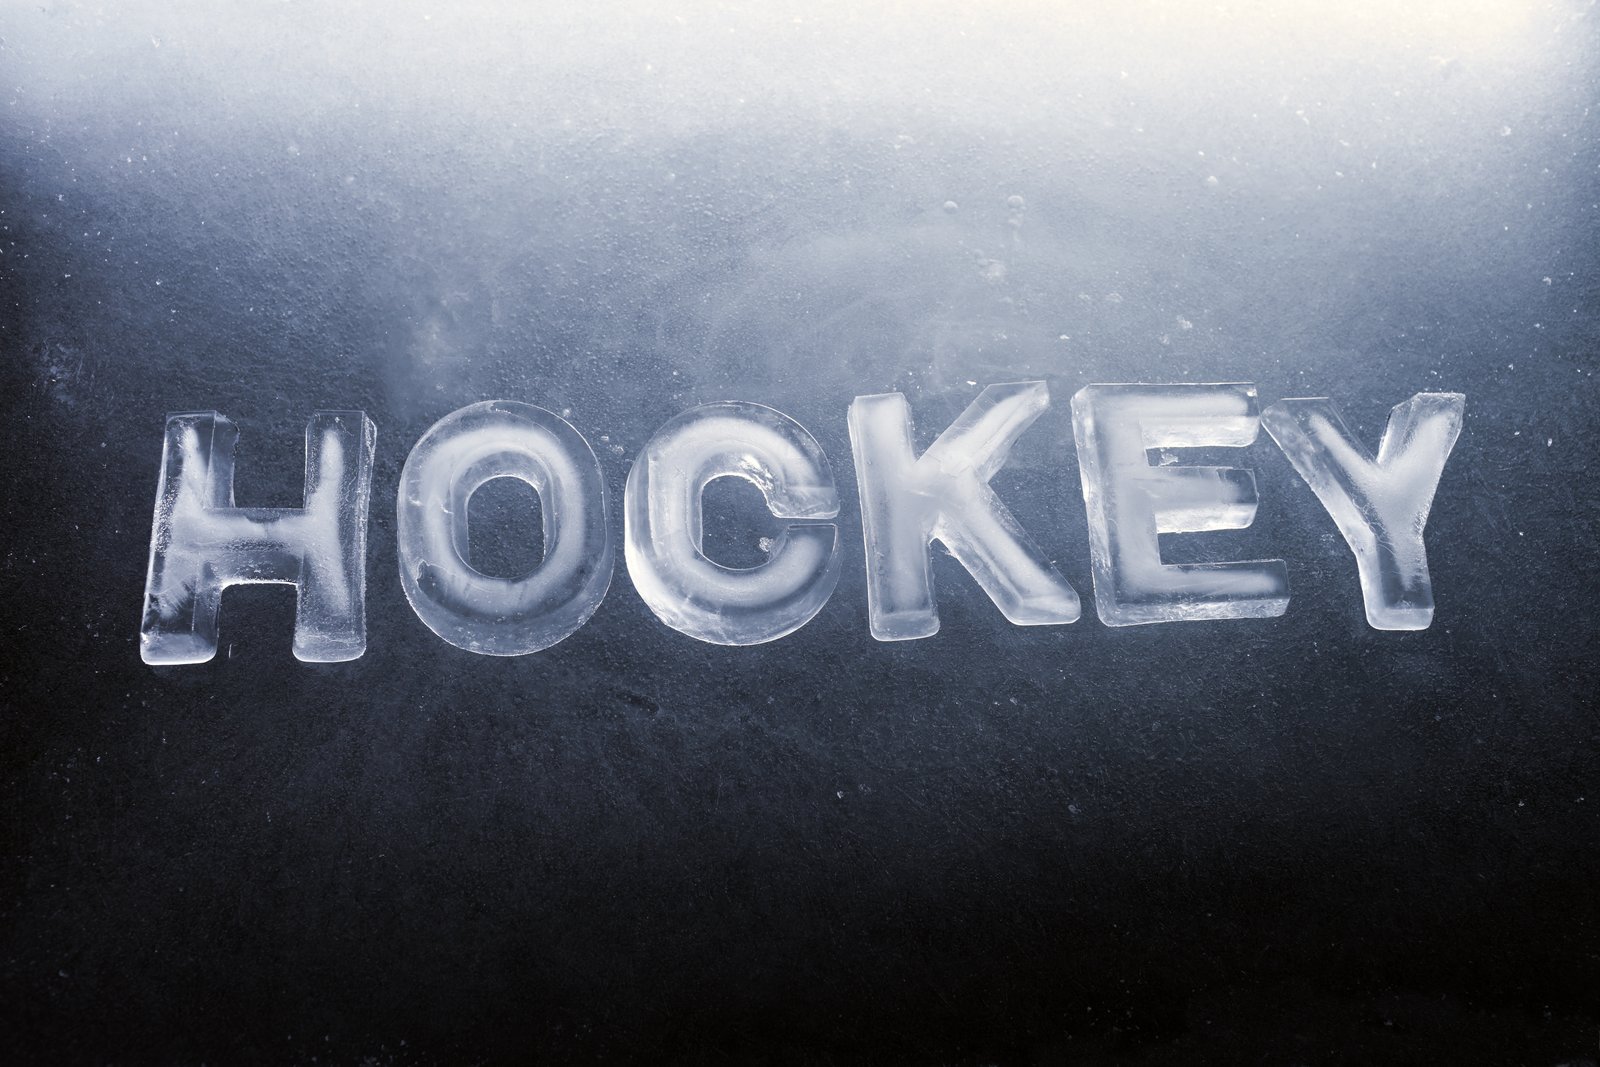 Hockey was introduced in India by the British Government in the late 19th century.Hockey was introduced in India by the British Government in the late 19th century.